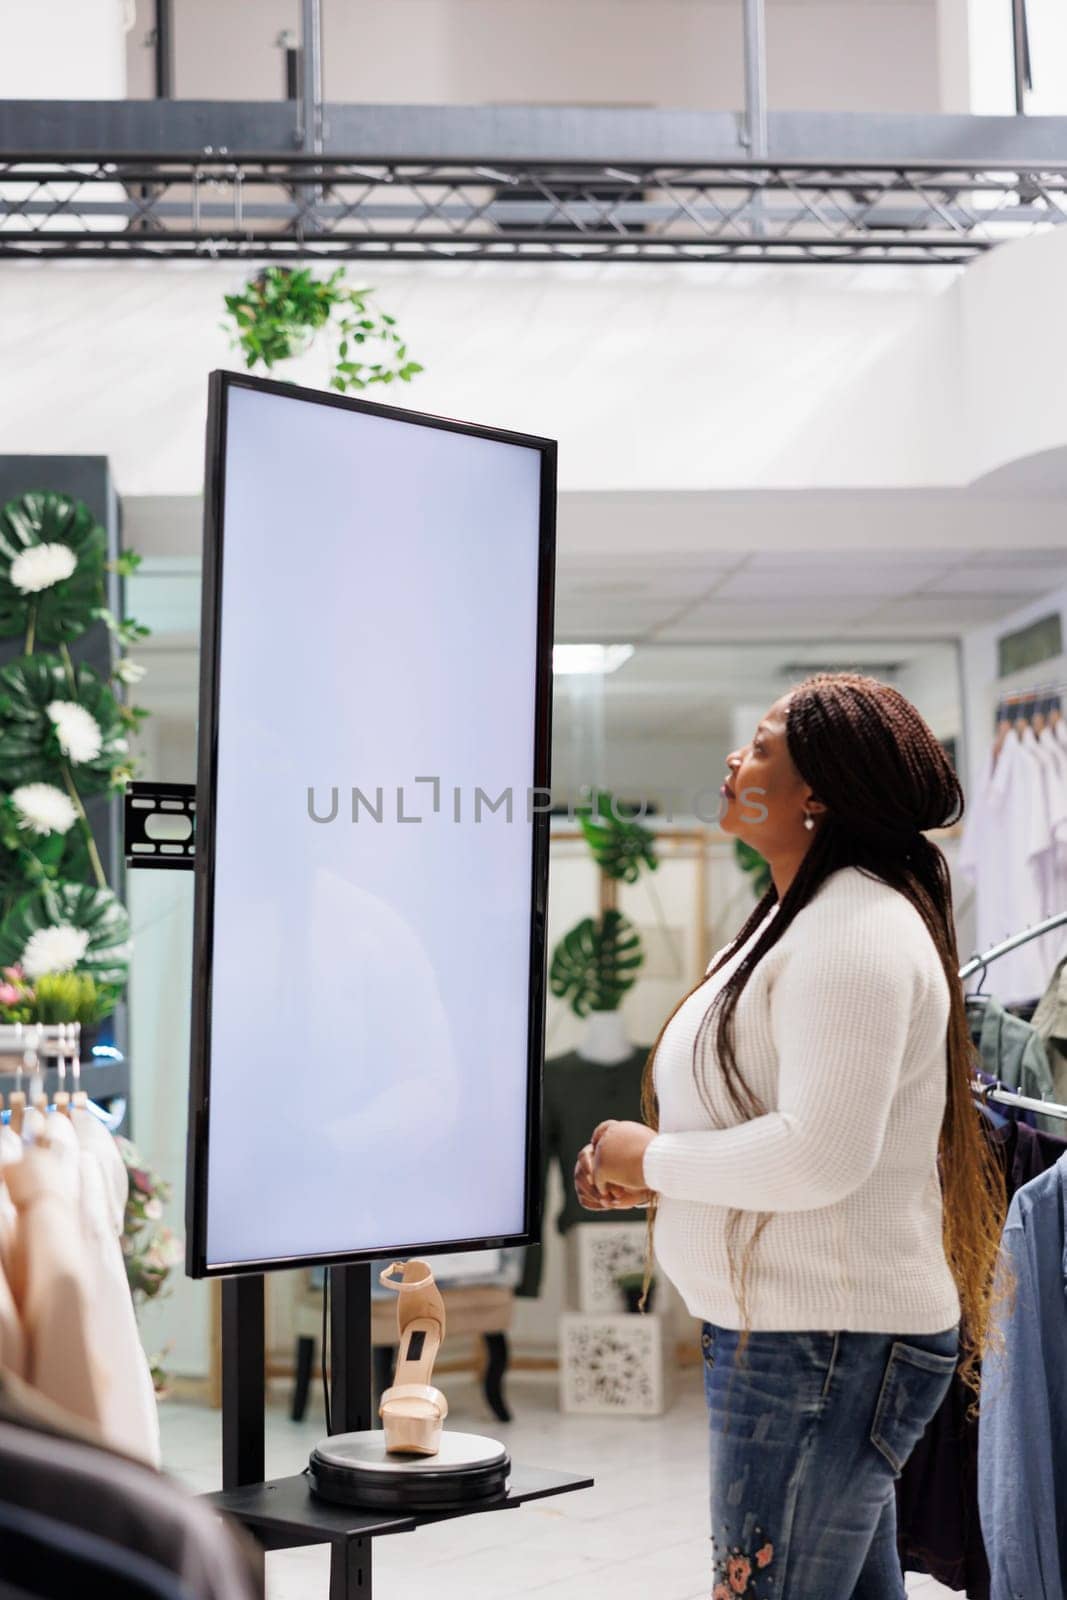 Boutique customer reading information on interactive display board showcasing stiletto shoes for sale. Woman checking advertisement on digital whiteboard promoting brand new collection